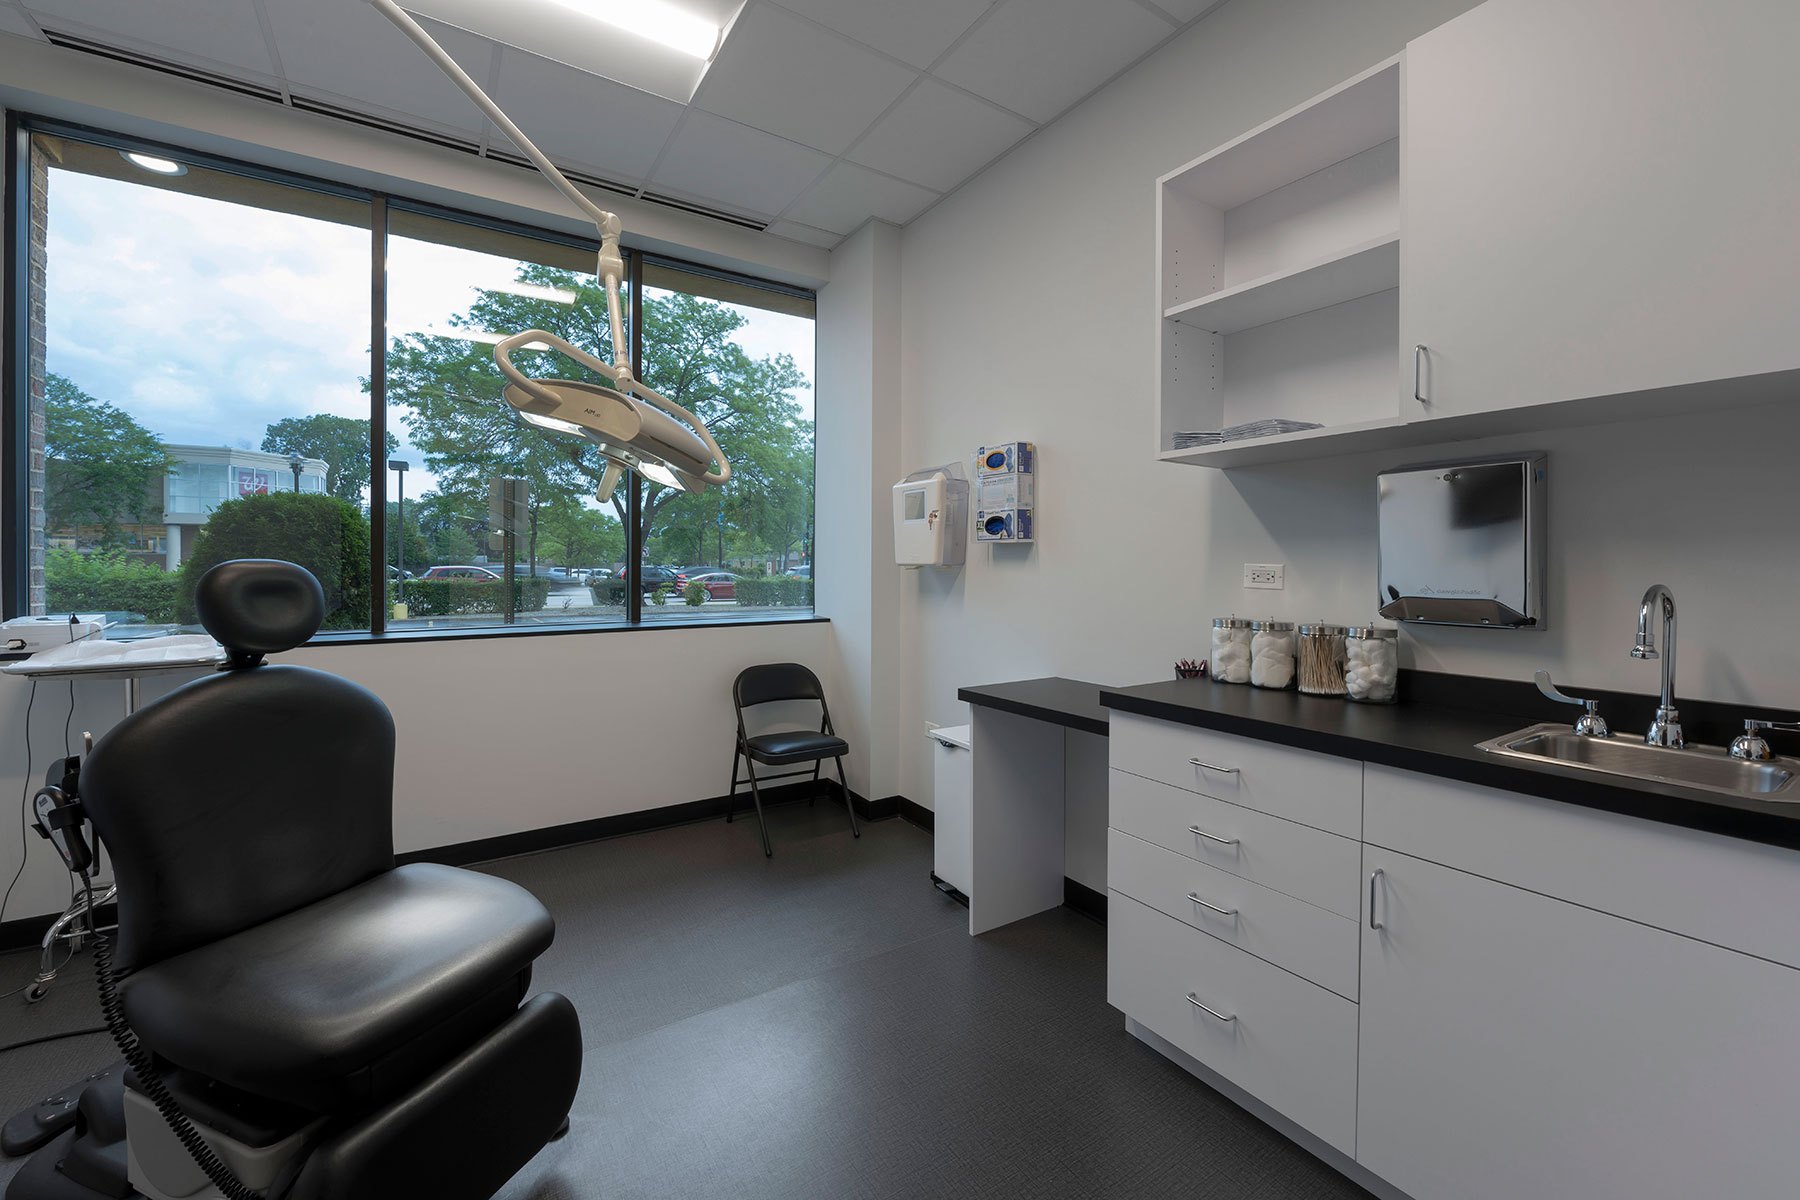 procedure room - Advanced Skin & MOHS Surgery Clinics, Morton Grove Custom Home. America's Custom Home Builders: New Construction, Remodeling, Restoration Services. Residential and Commercial.